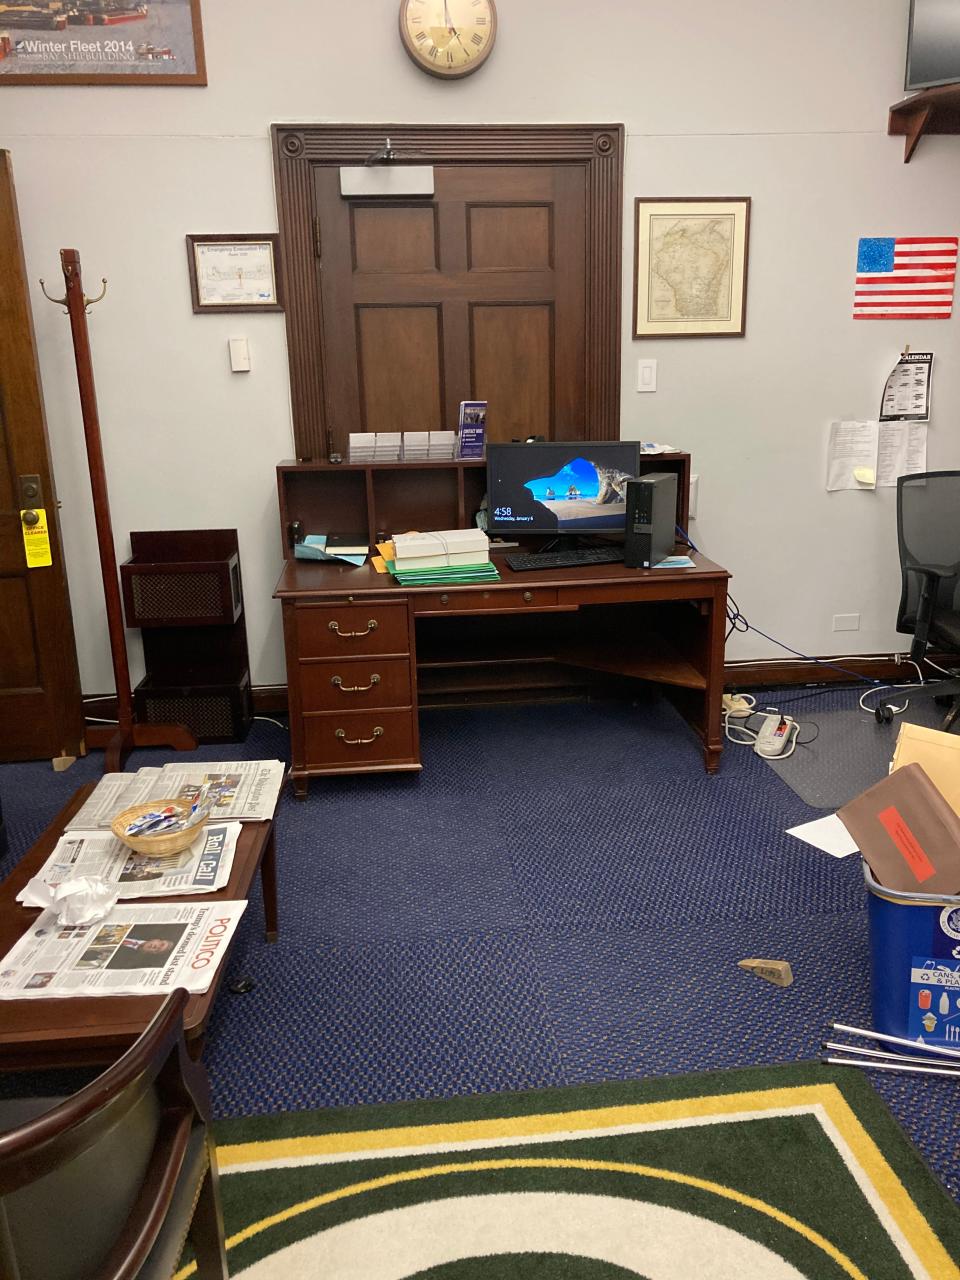 Rep. Mike Gallagher's office door in Washington, D.C., barricaded from the inside on Jan. 6, 2021.